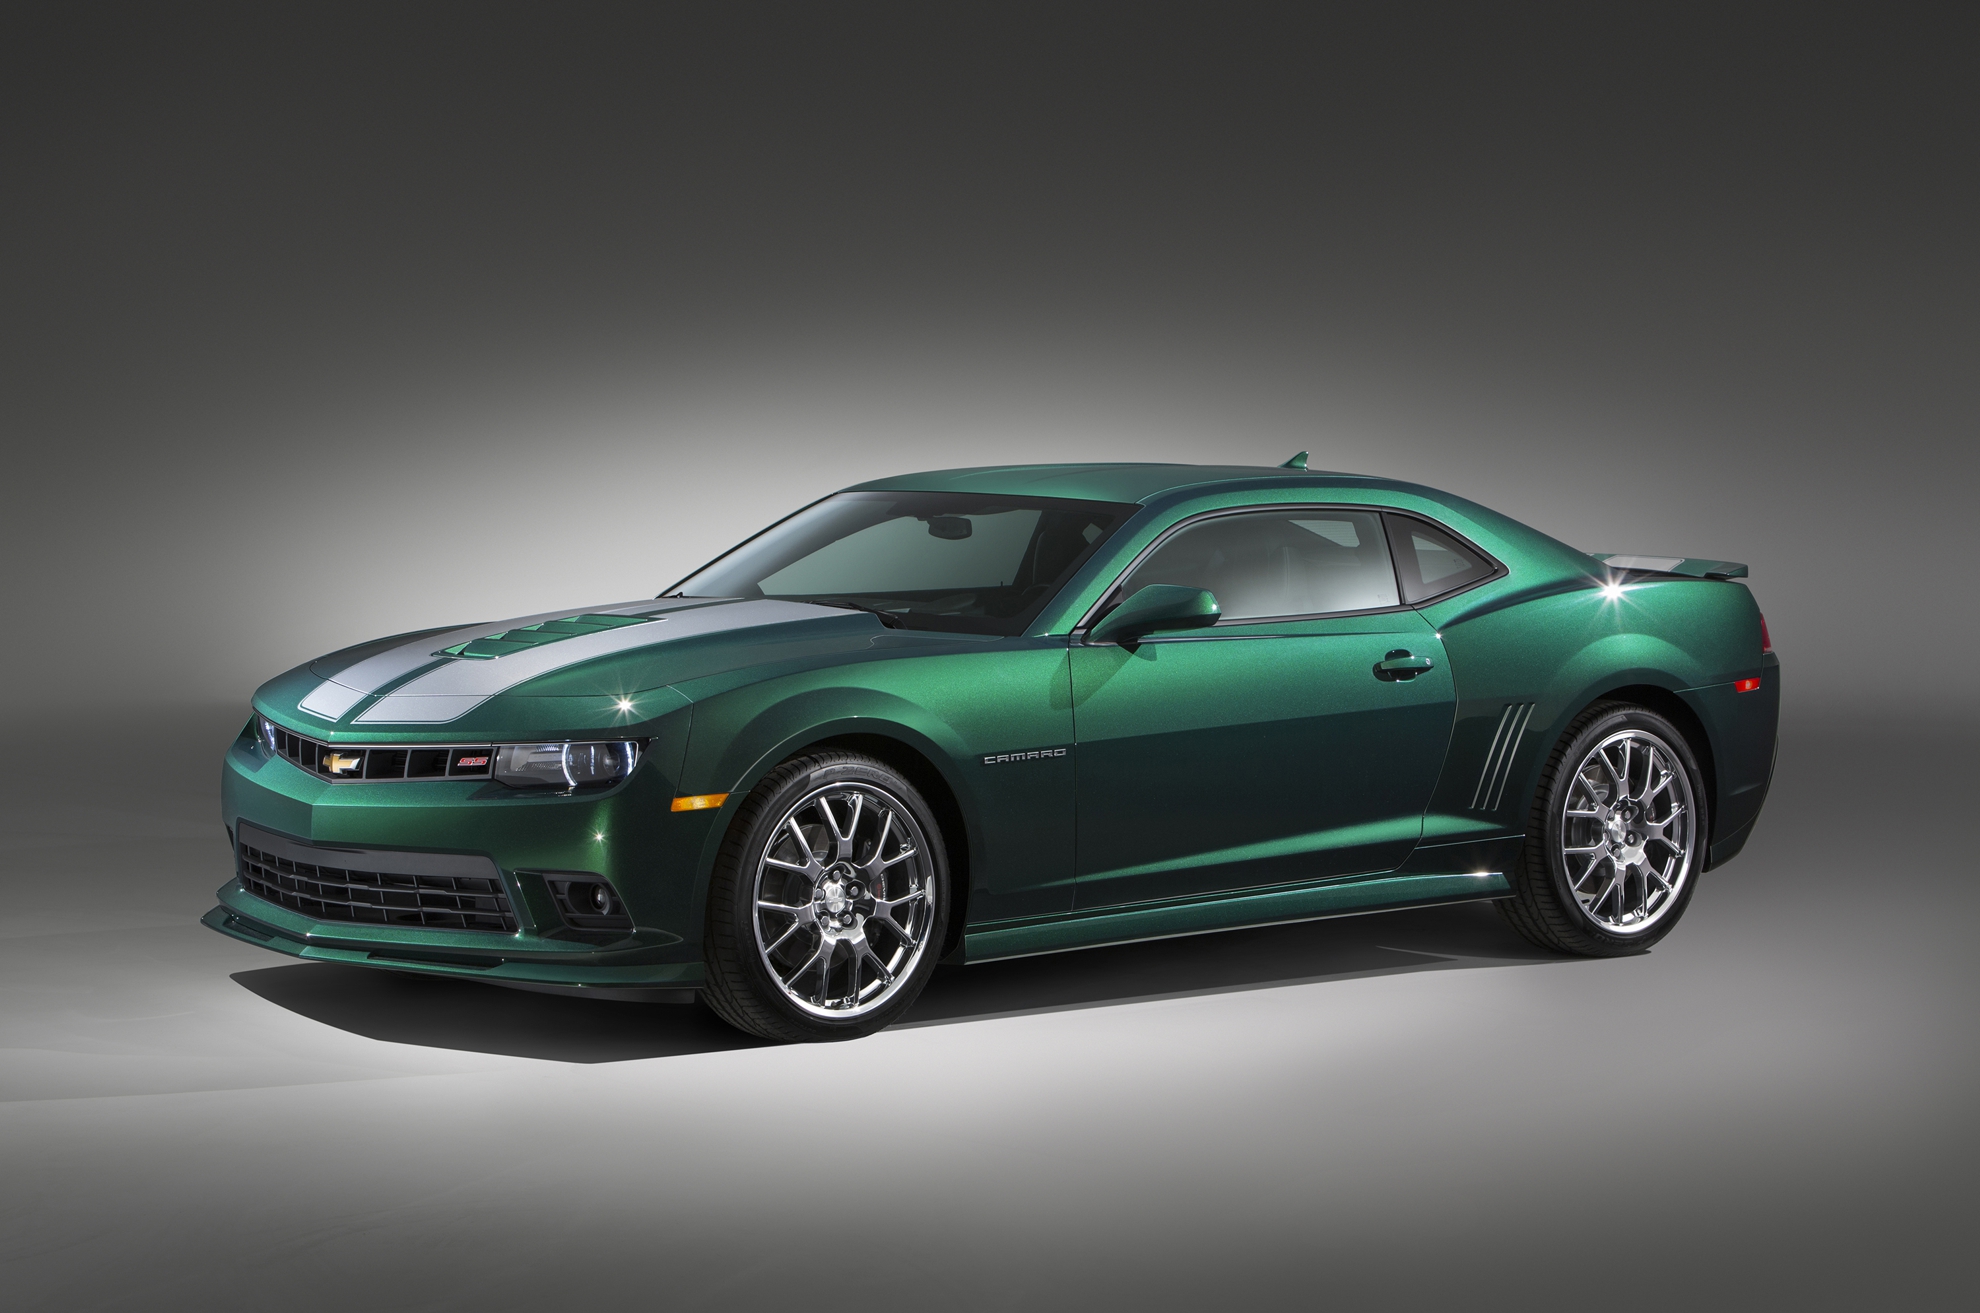 Fans Invited to Name 2015 Camaro Special Edition